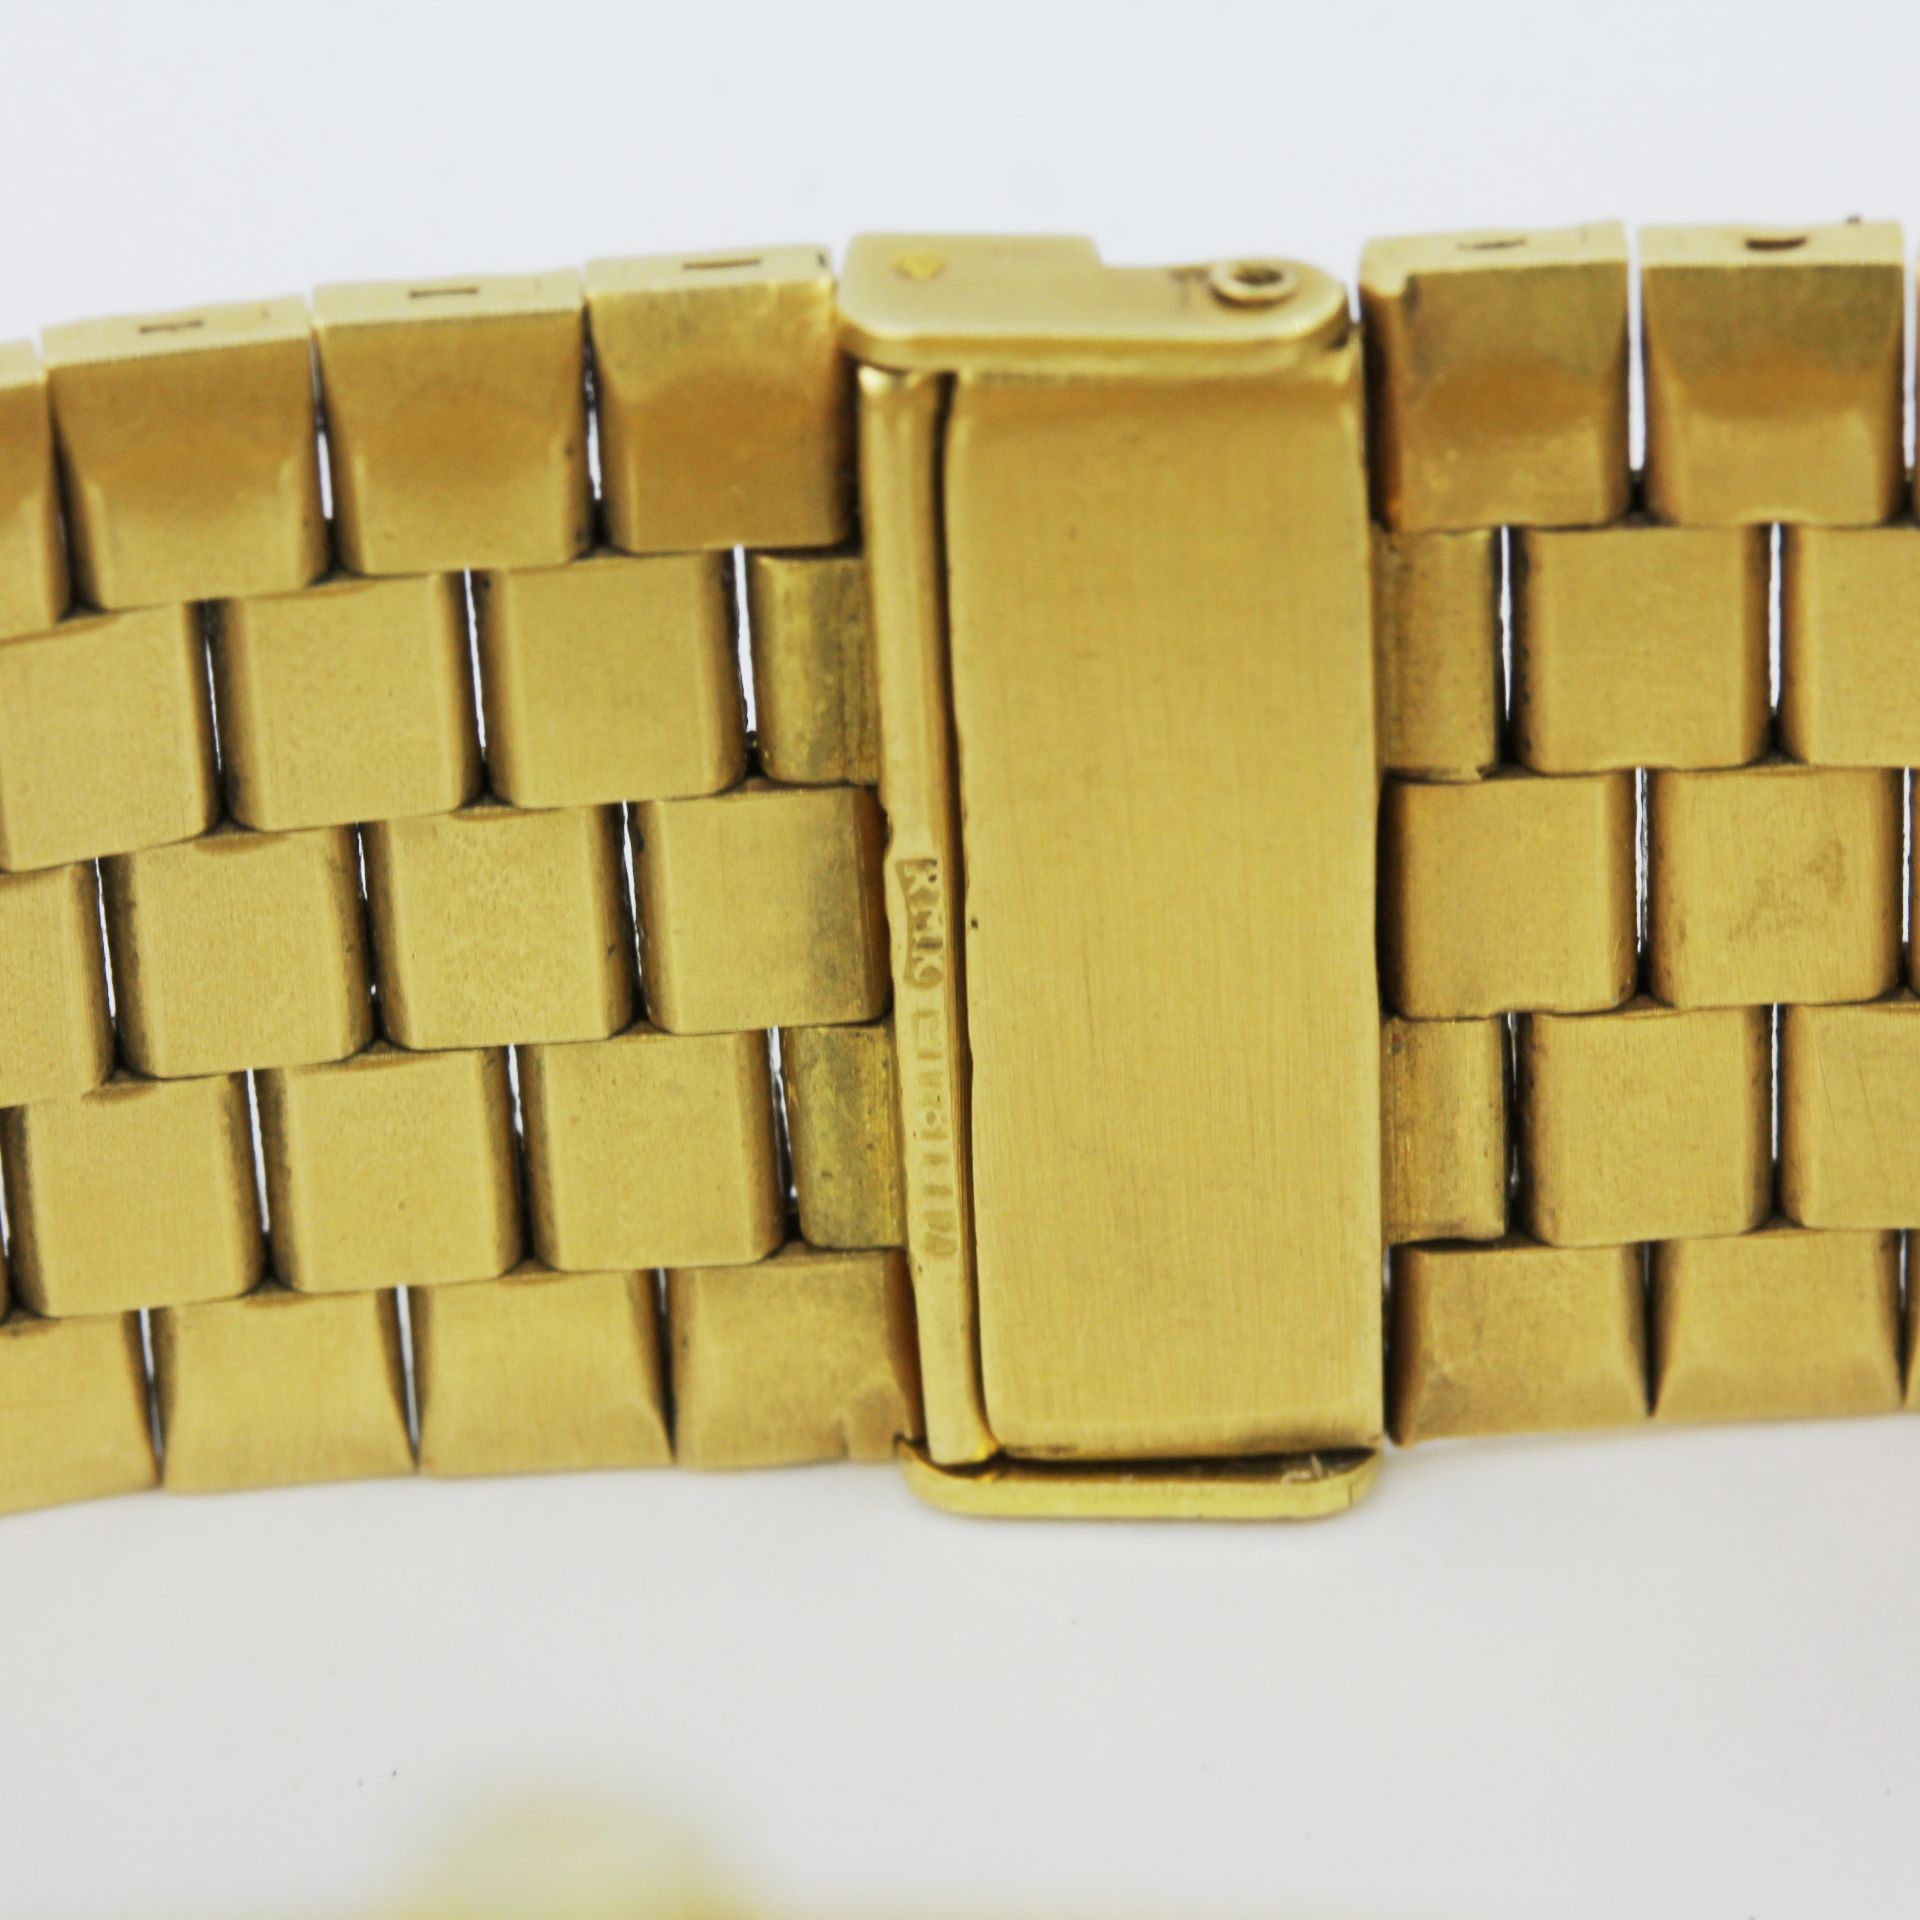 A gentleman's 18ct yellow gold Bulova wrist watch, serial number 1301650. - Image 4 of 4